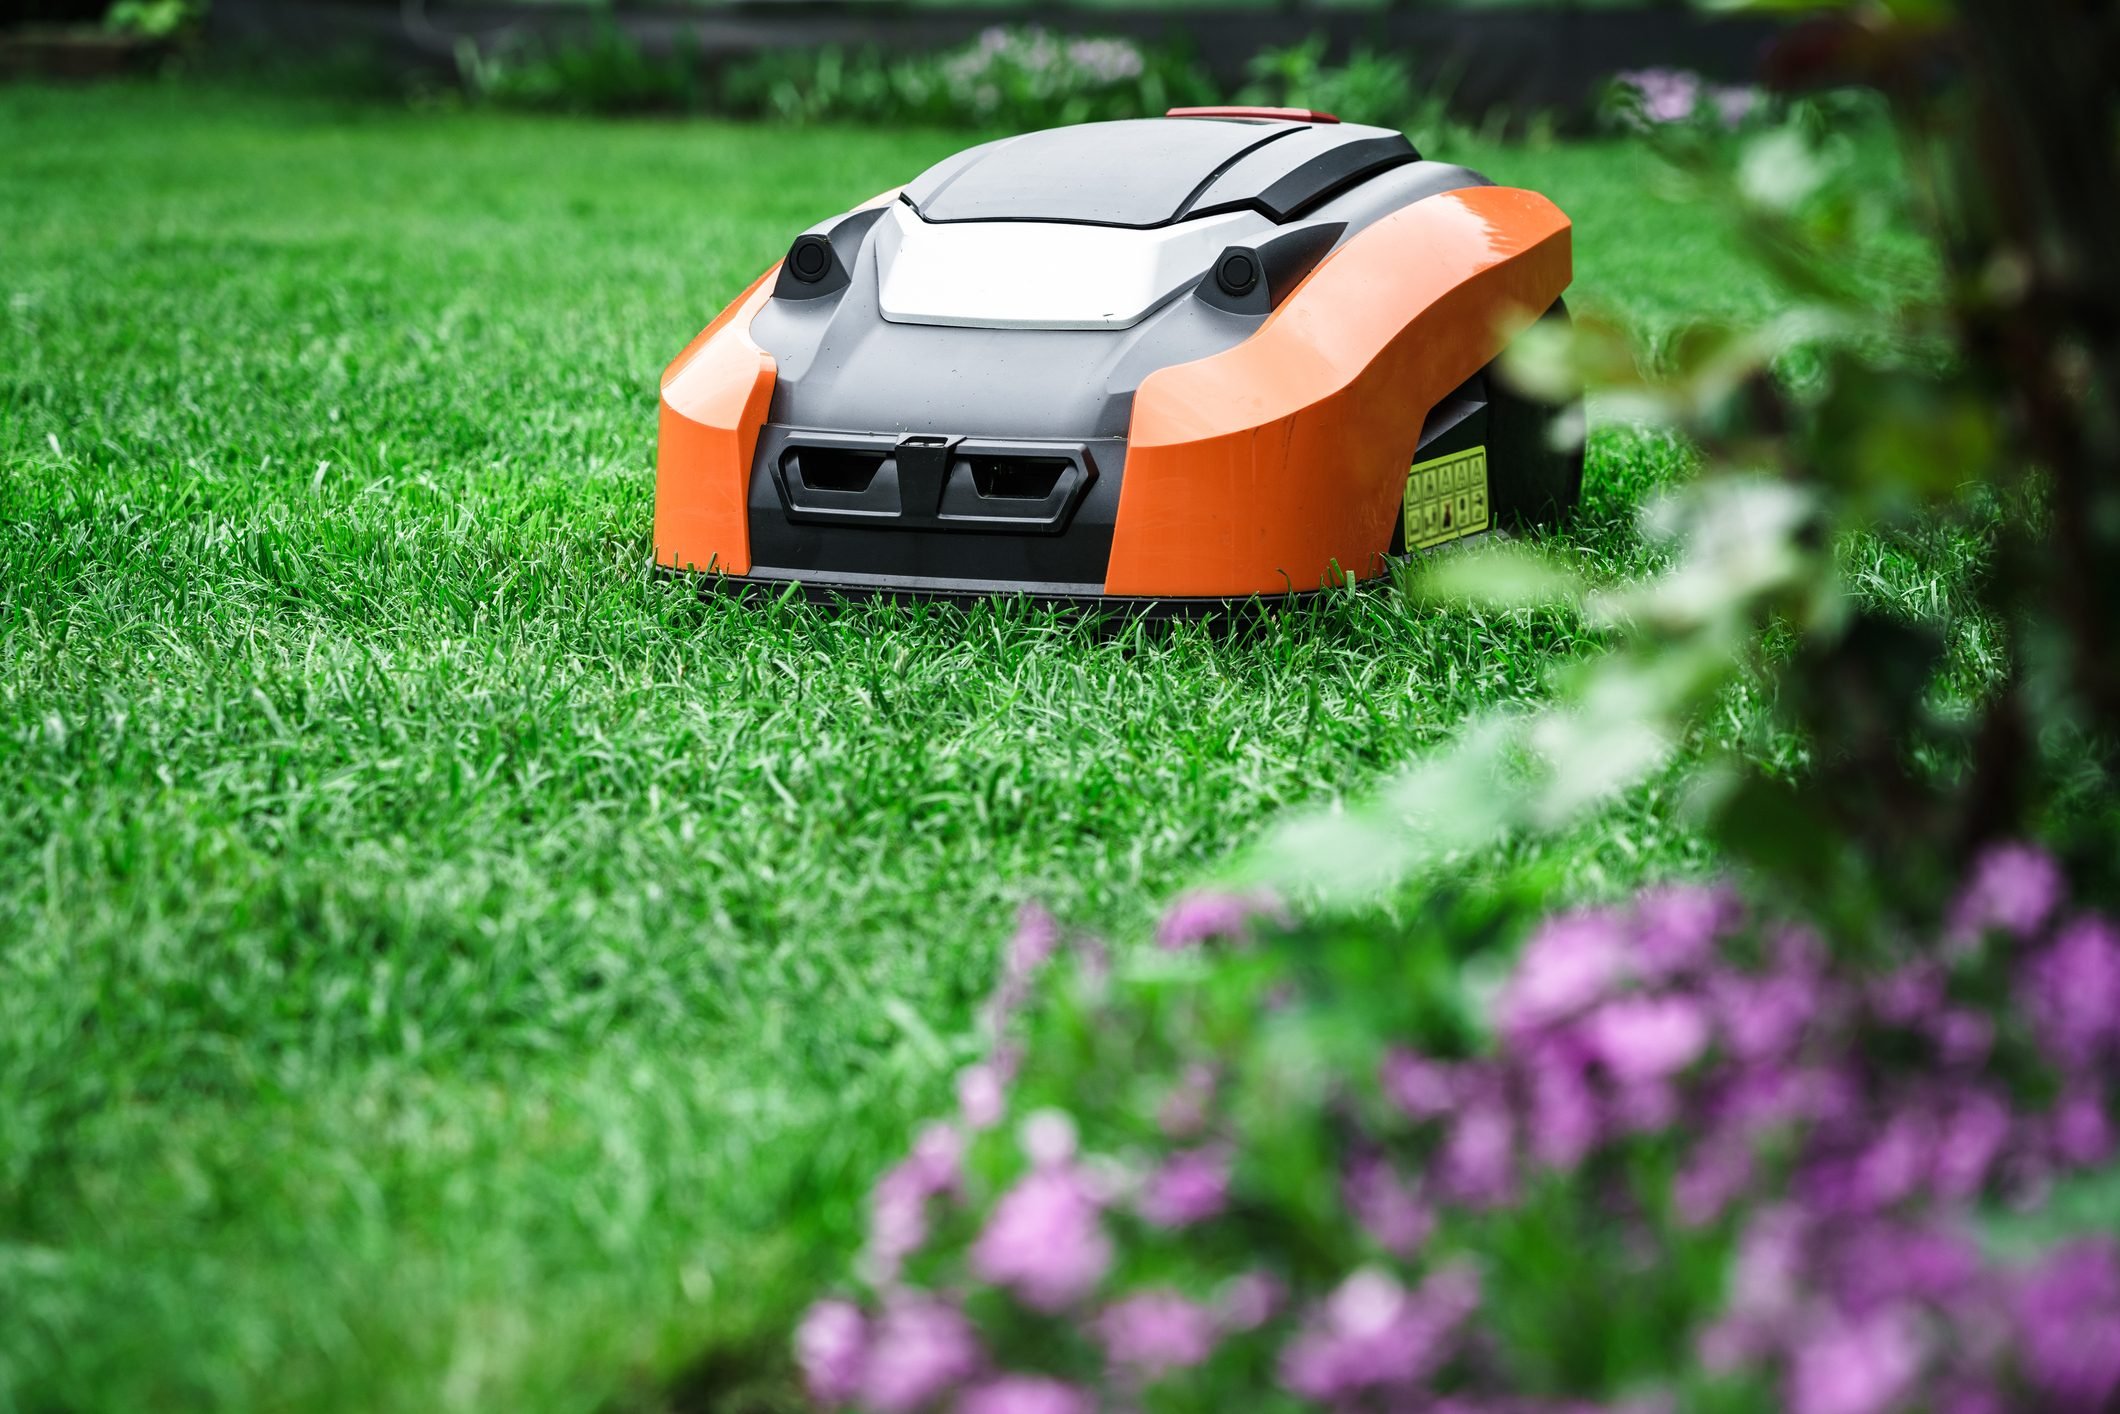 virkelighed James Dyson Armstrong STIHL Just Recalled a Robotic Lawn Mower Docking Station